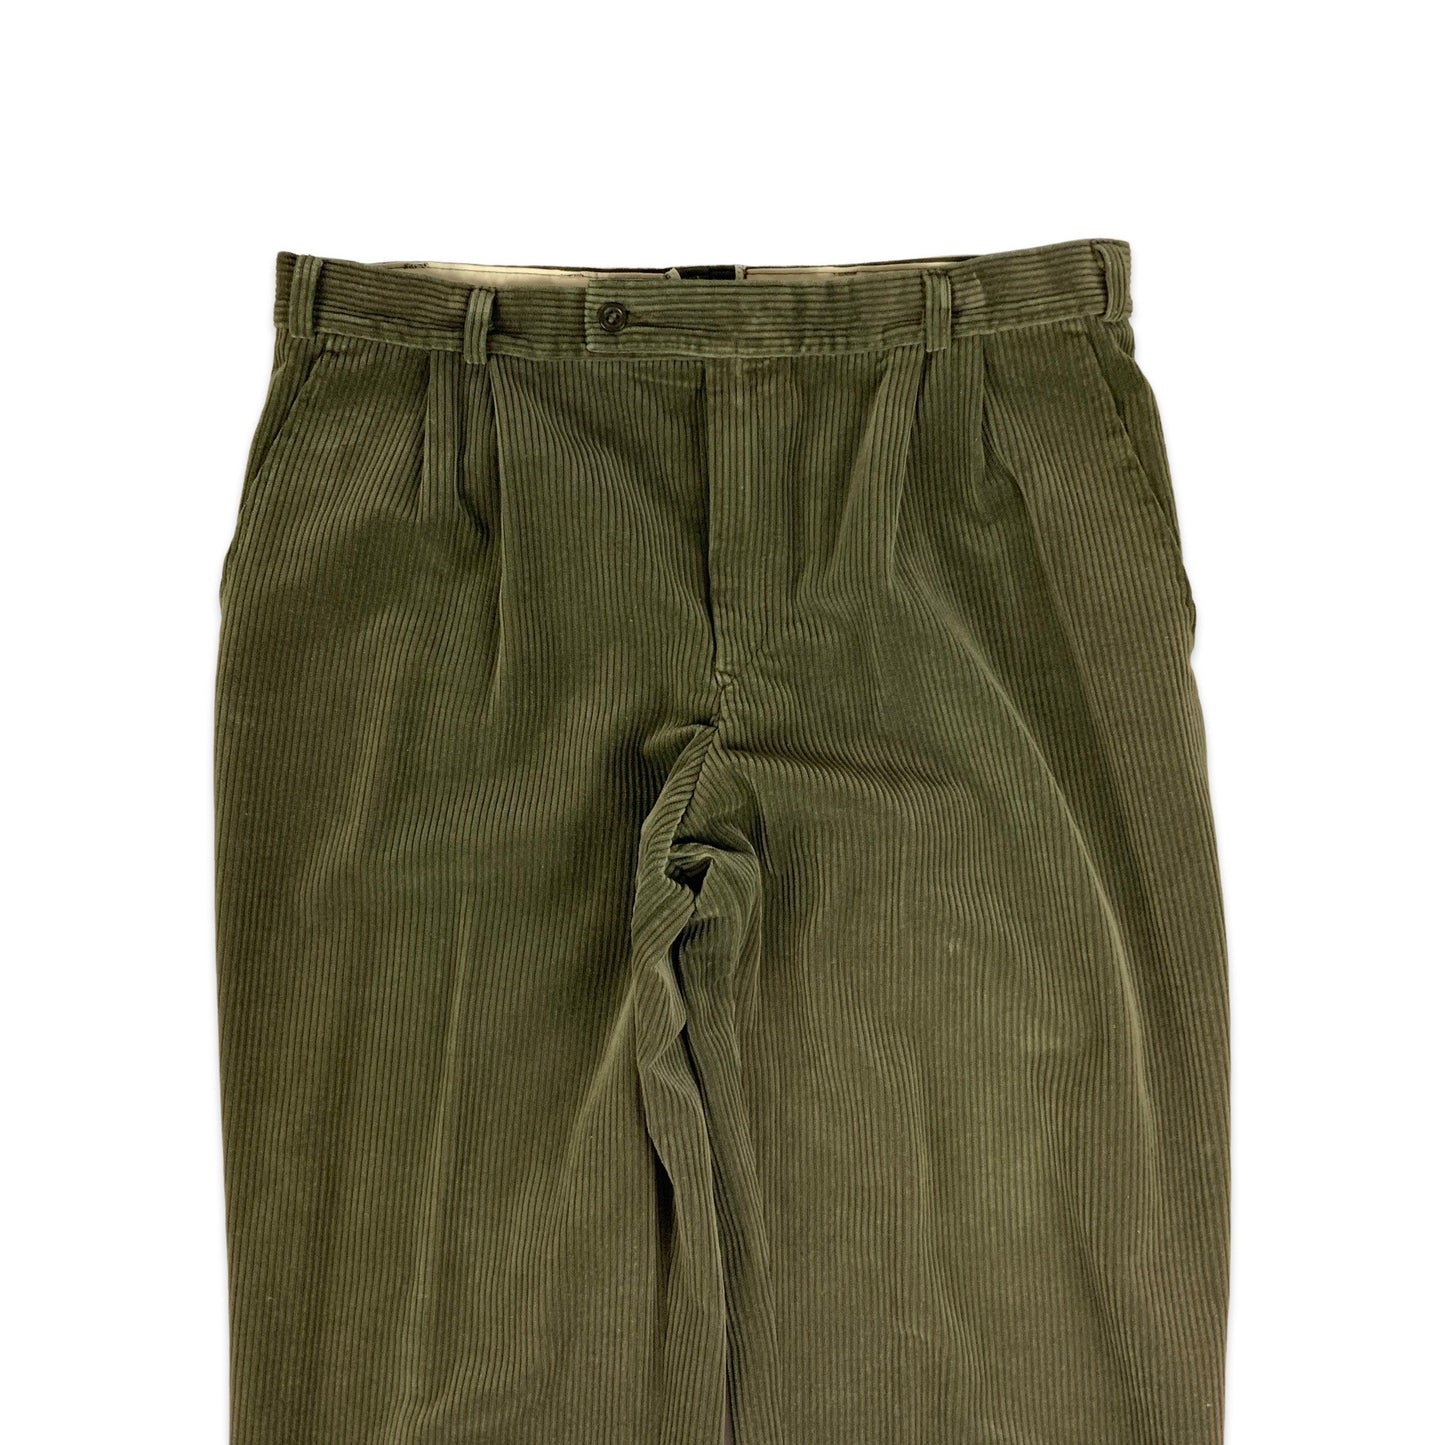 Vintage Green Pleated Cord Trousers 36W 31L